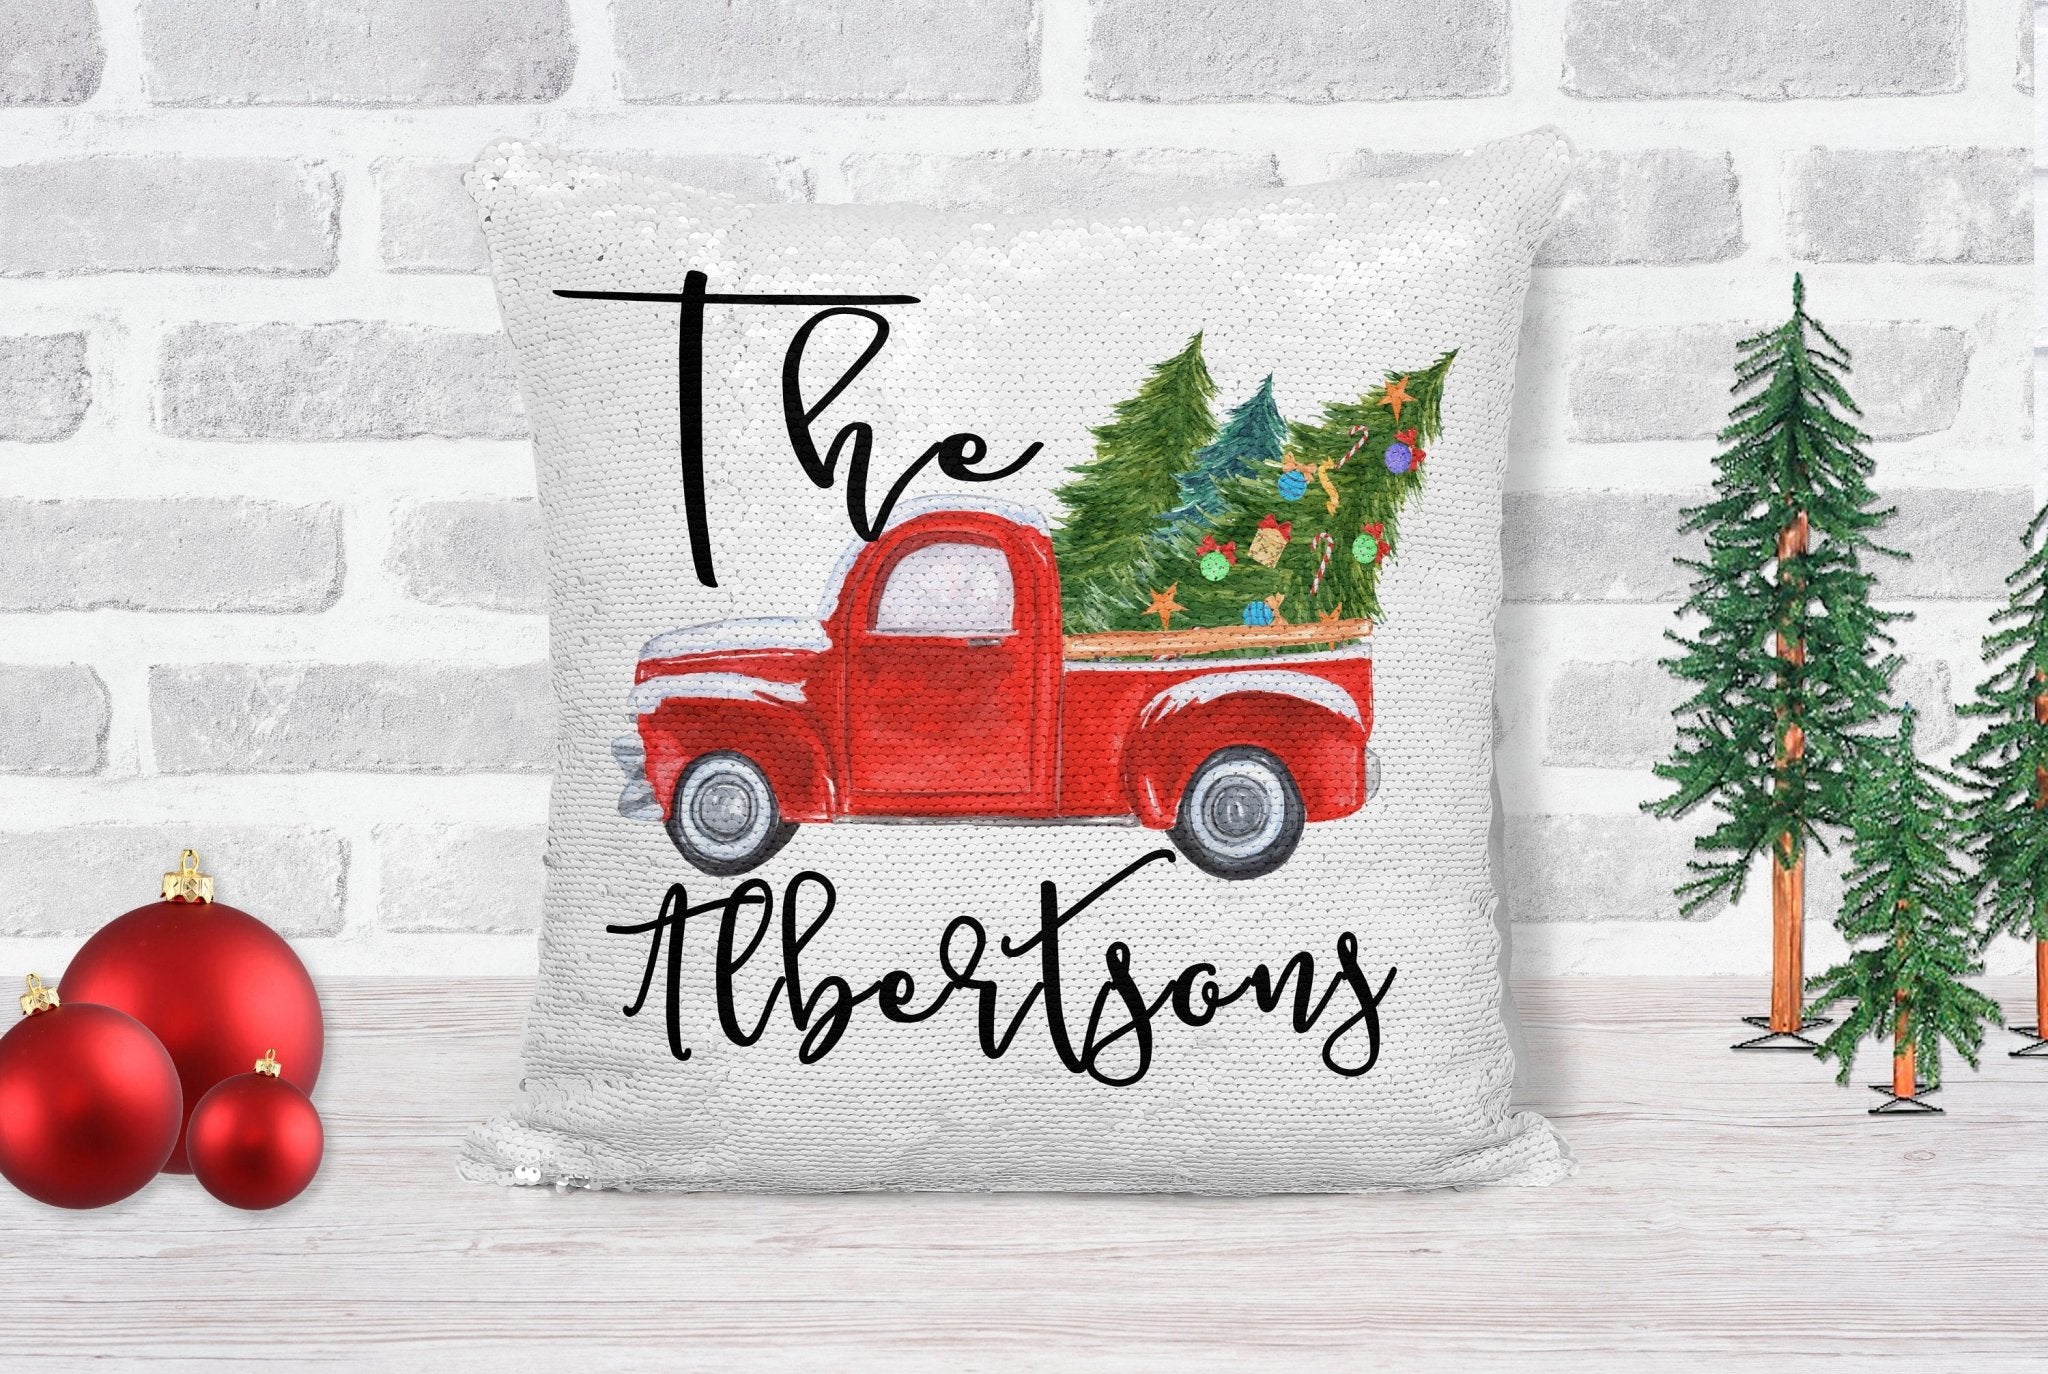 Christmas Truck With Trees Custom Pillow or Cover, Truck Pillow